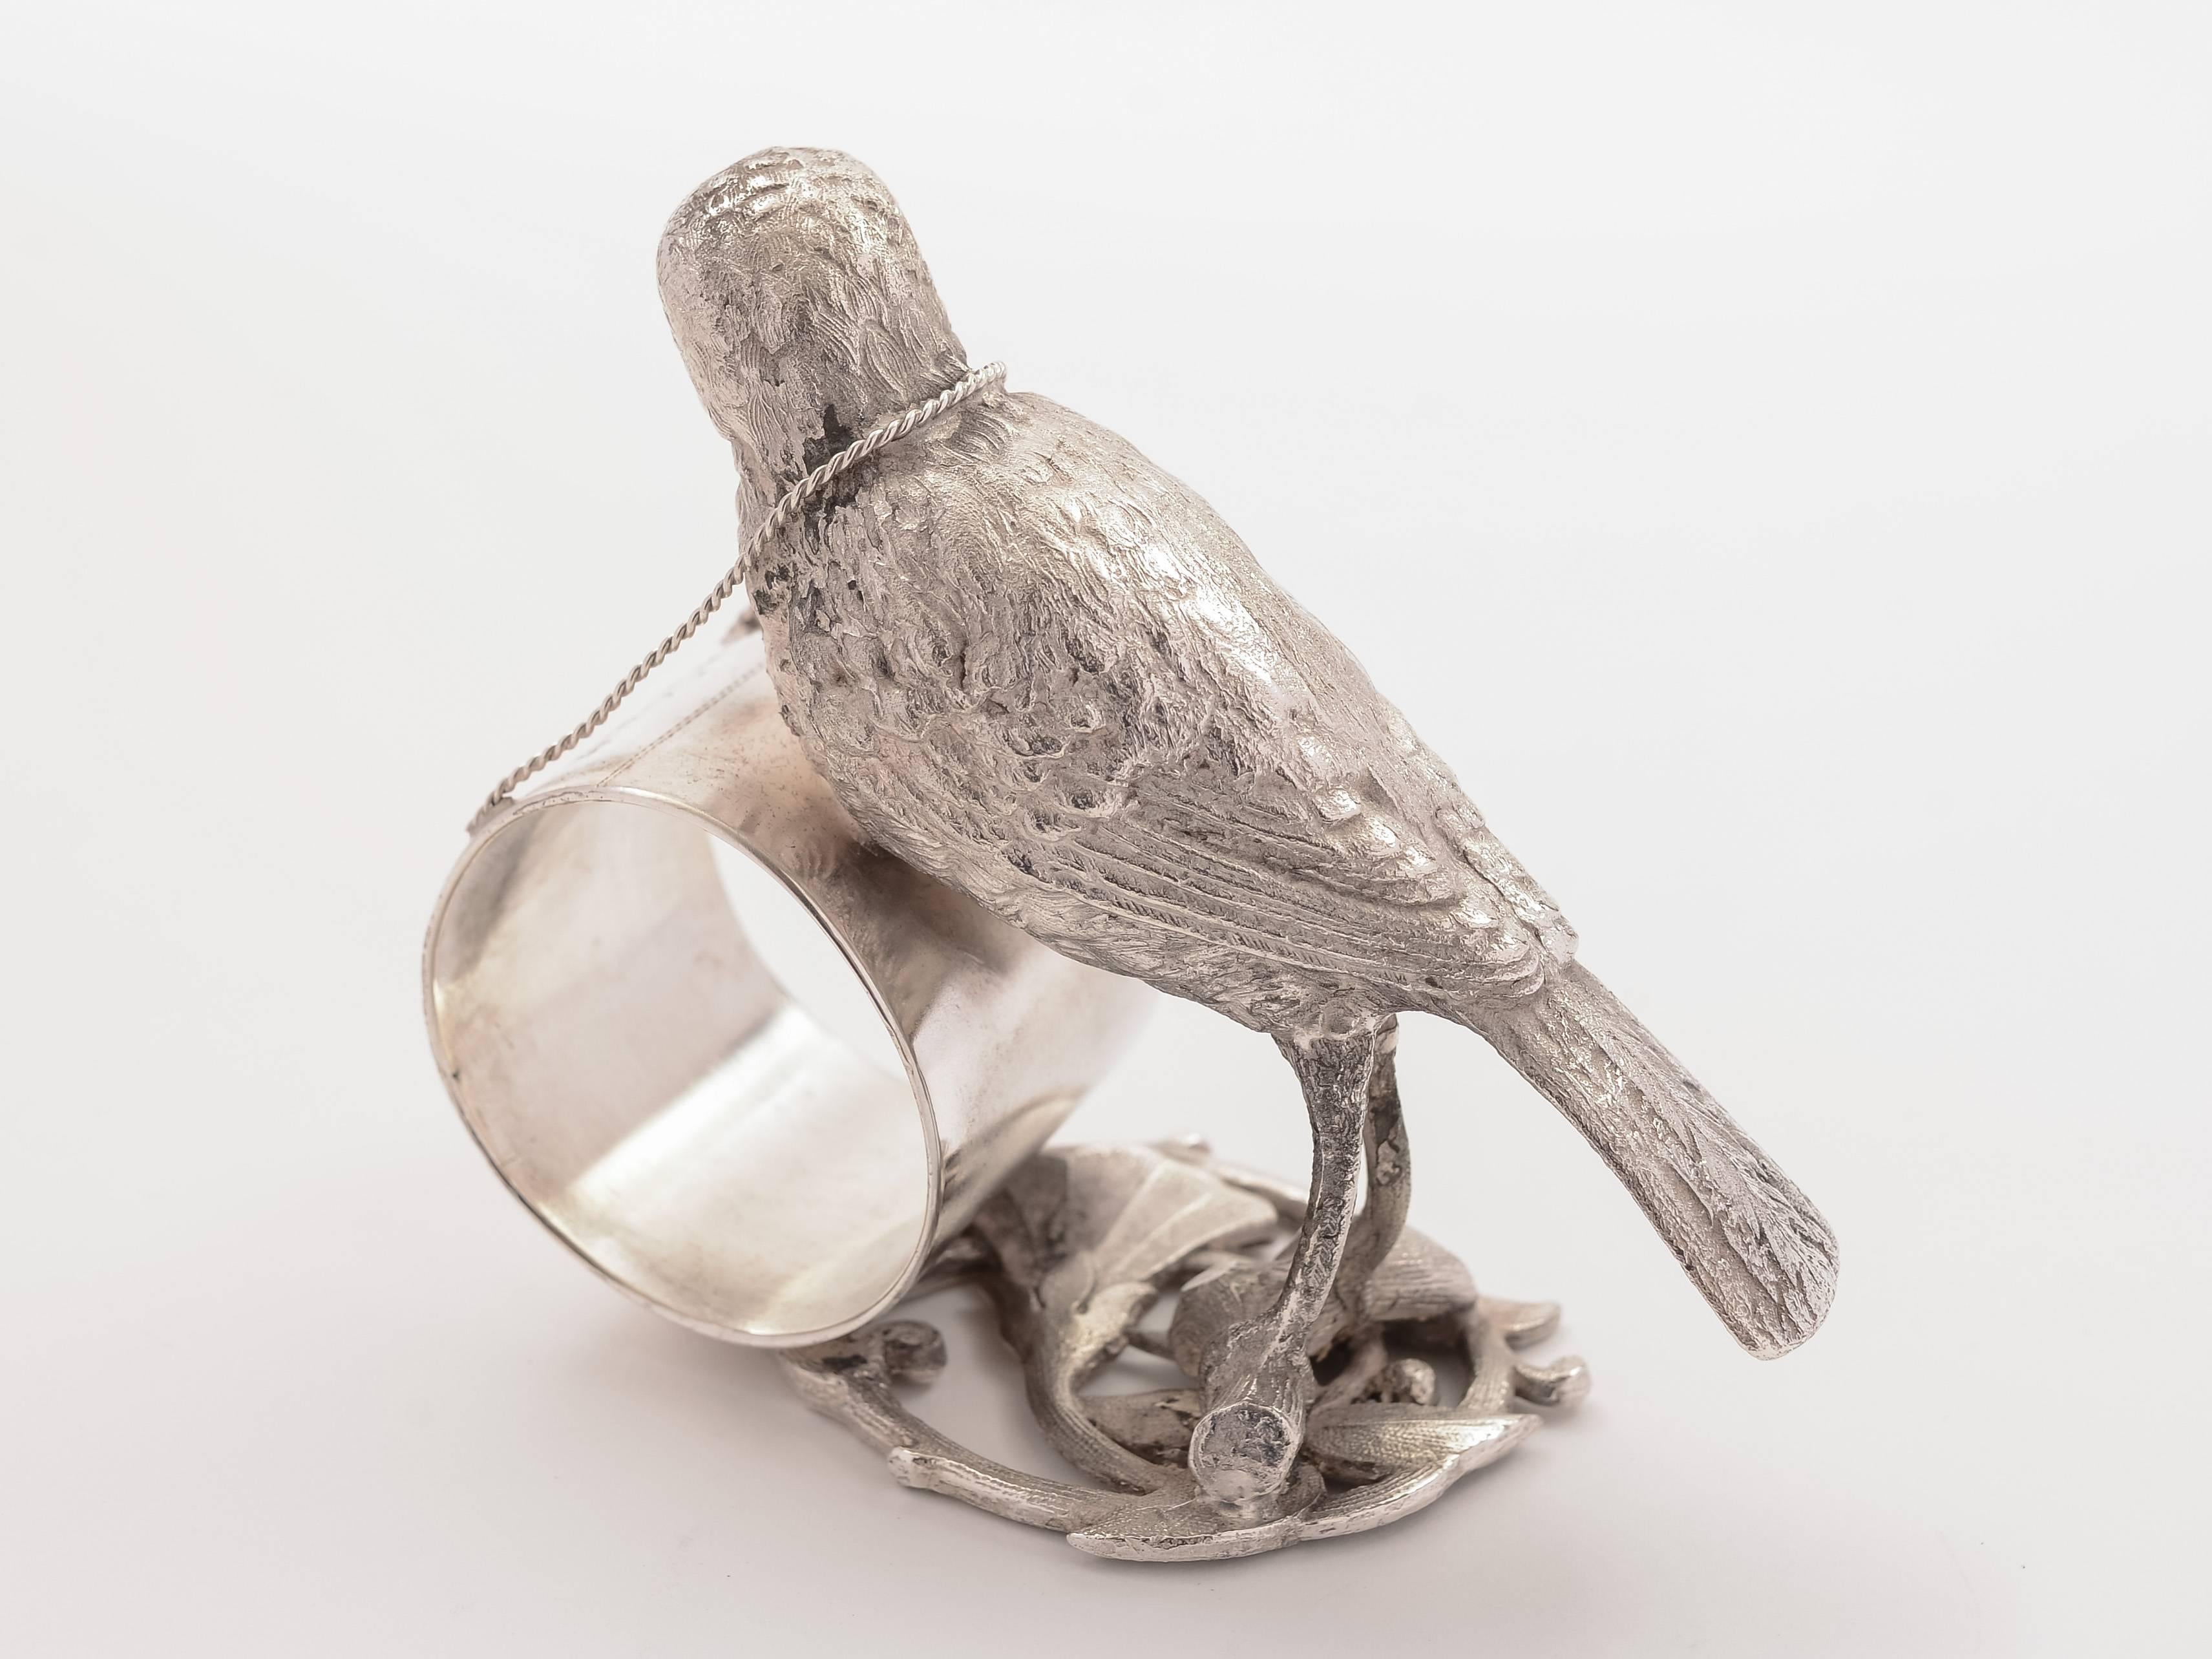 A nice American silver plated novelty napkin ring with nicely modelled bird standing on branch with napkin holder on a chain around its' neck, circa 1900.

Free worldwide delivery. 

Measurements:
Height: 3 1/2